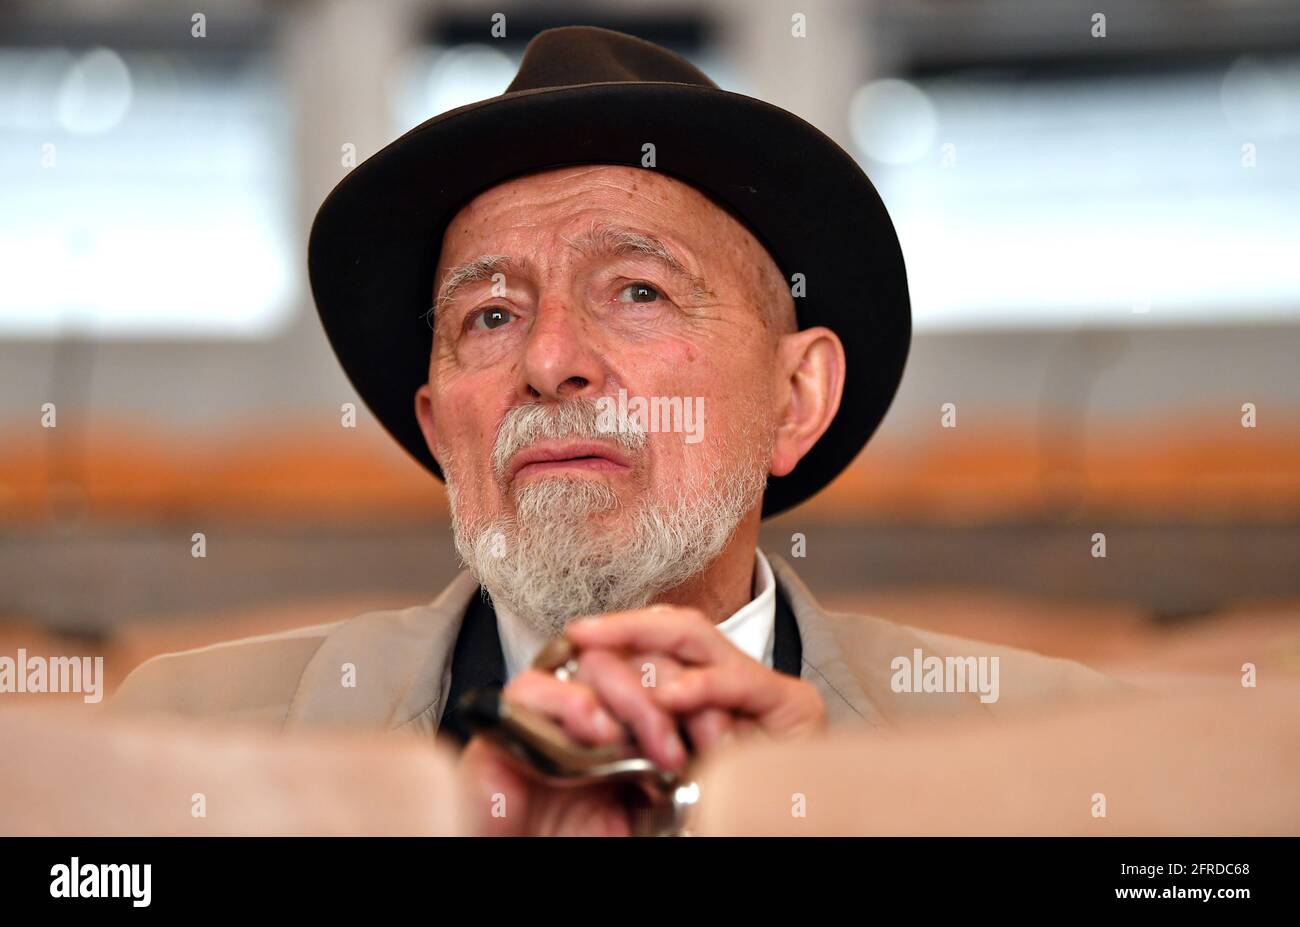 Meiningen, Germany. 19th May, 2021. Markus Lüpertz, painter and sculptor, is sitting in the auditorium of the Staatstheater Meiningen. He will bring the opera 'La Bohème' by composer Giacomo Puccini (1885-1924) to the Meiningen stage. In addition to stage design and costume design, the 80-year-old will also be responsible for directing for the first time. The premiere of this opera production is scheduled for 10 December. Credit: Martin Schutt/dpa-Zentralbild/dpa/Alamy Live News Stock Photo